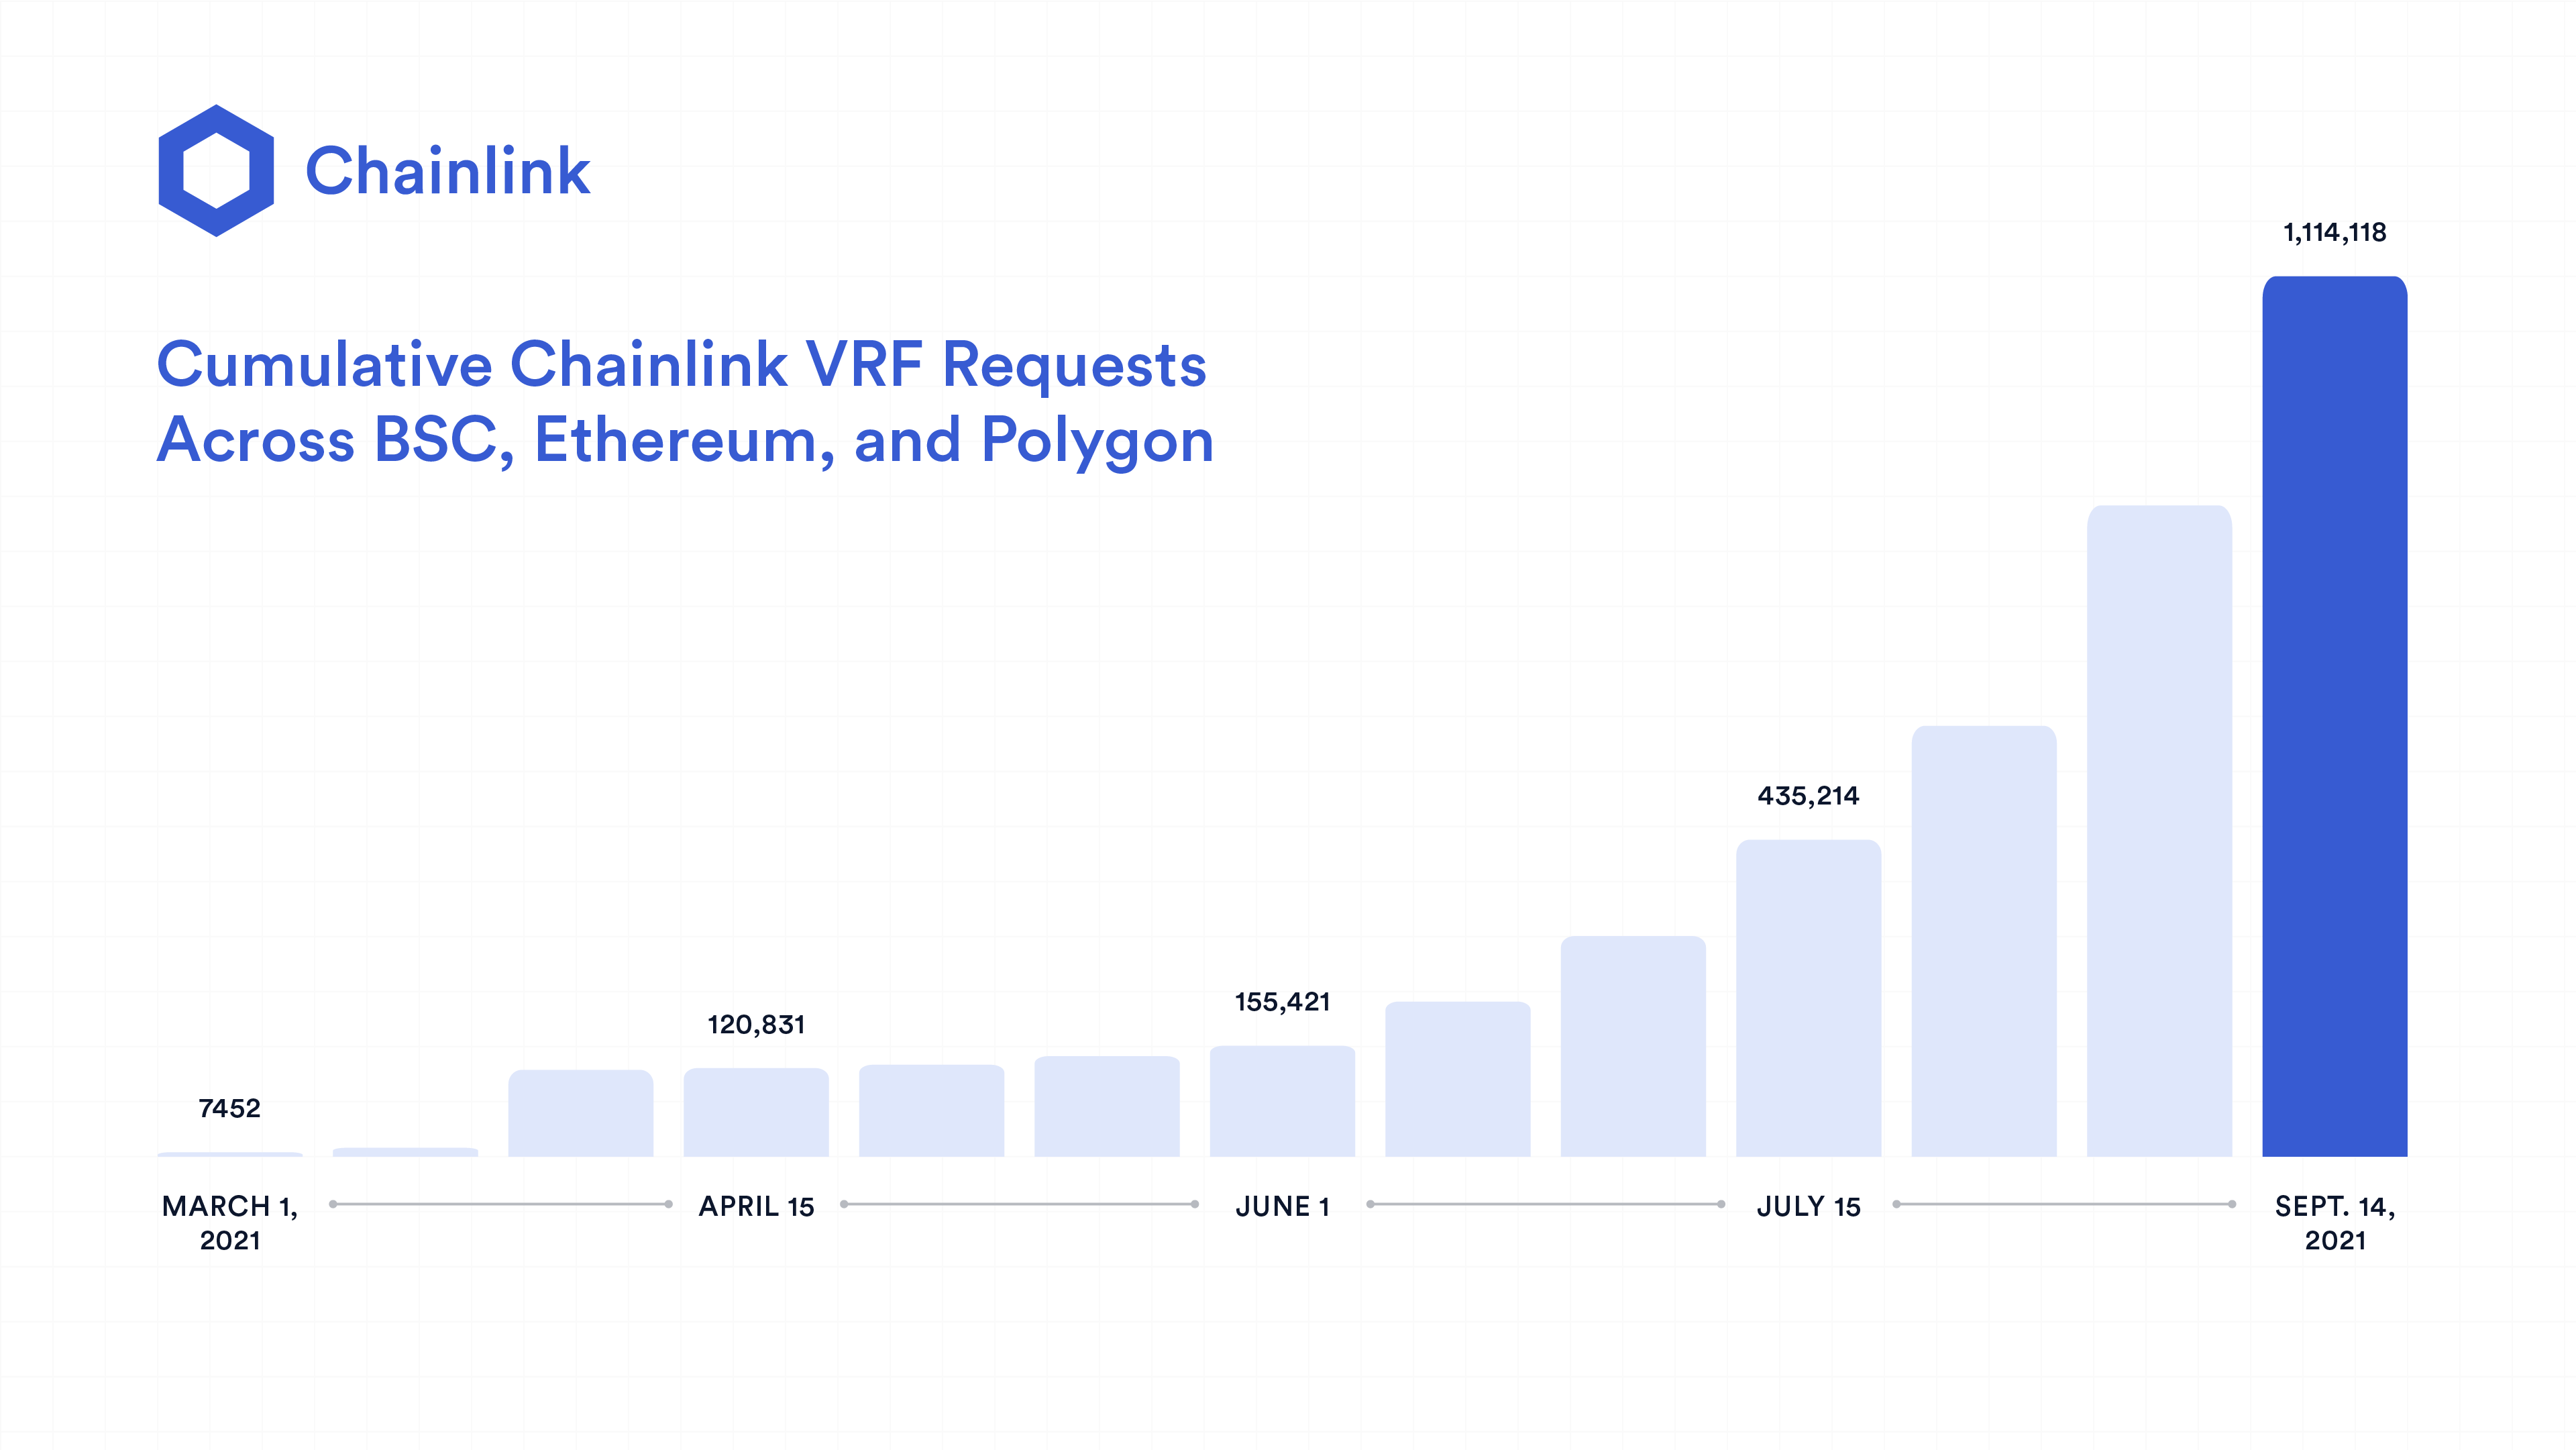 A diagram showing how the number of Chainlink VRF requests is rapidly increasing.